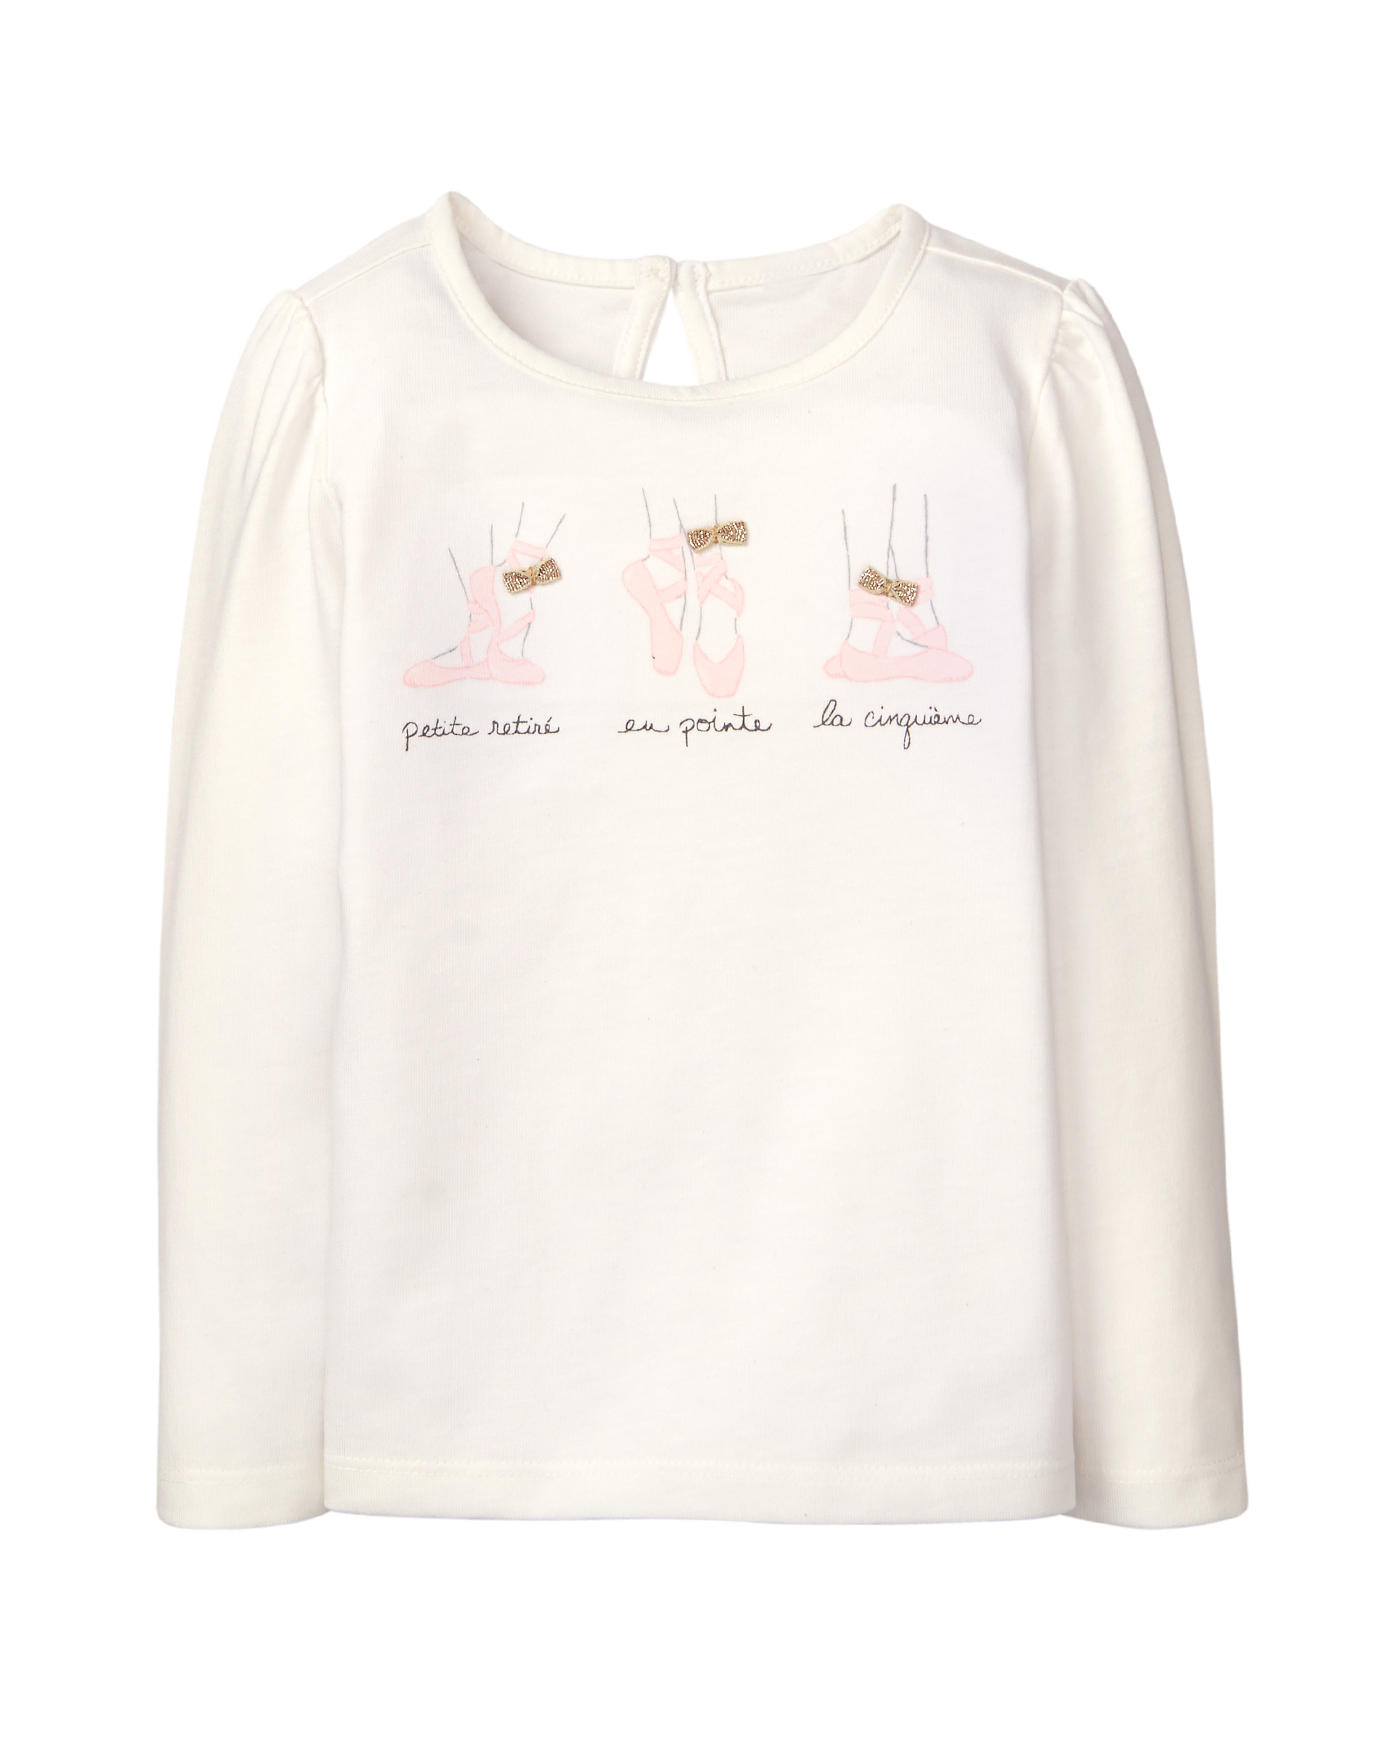 Girl Ivory Ballet Shoes Tee by Janie and Jack